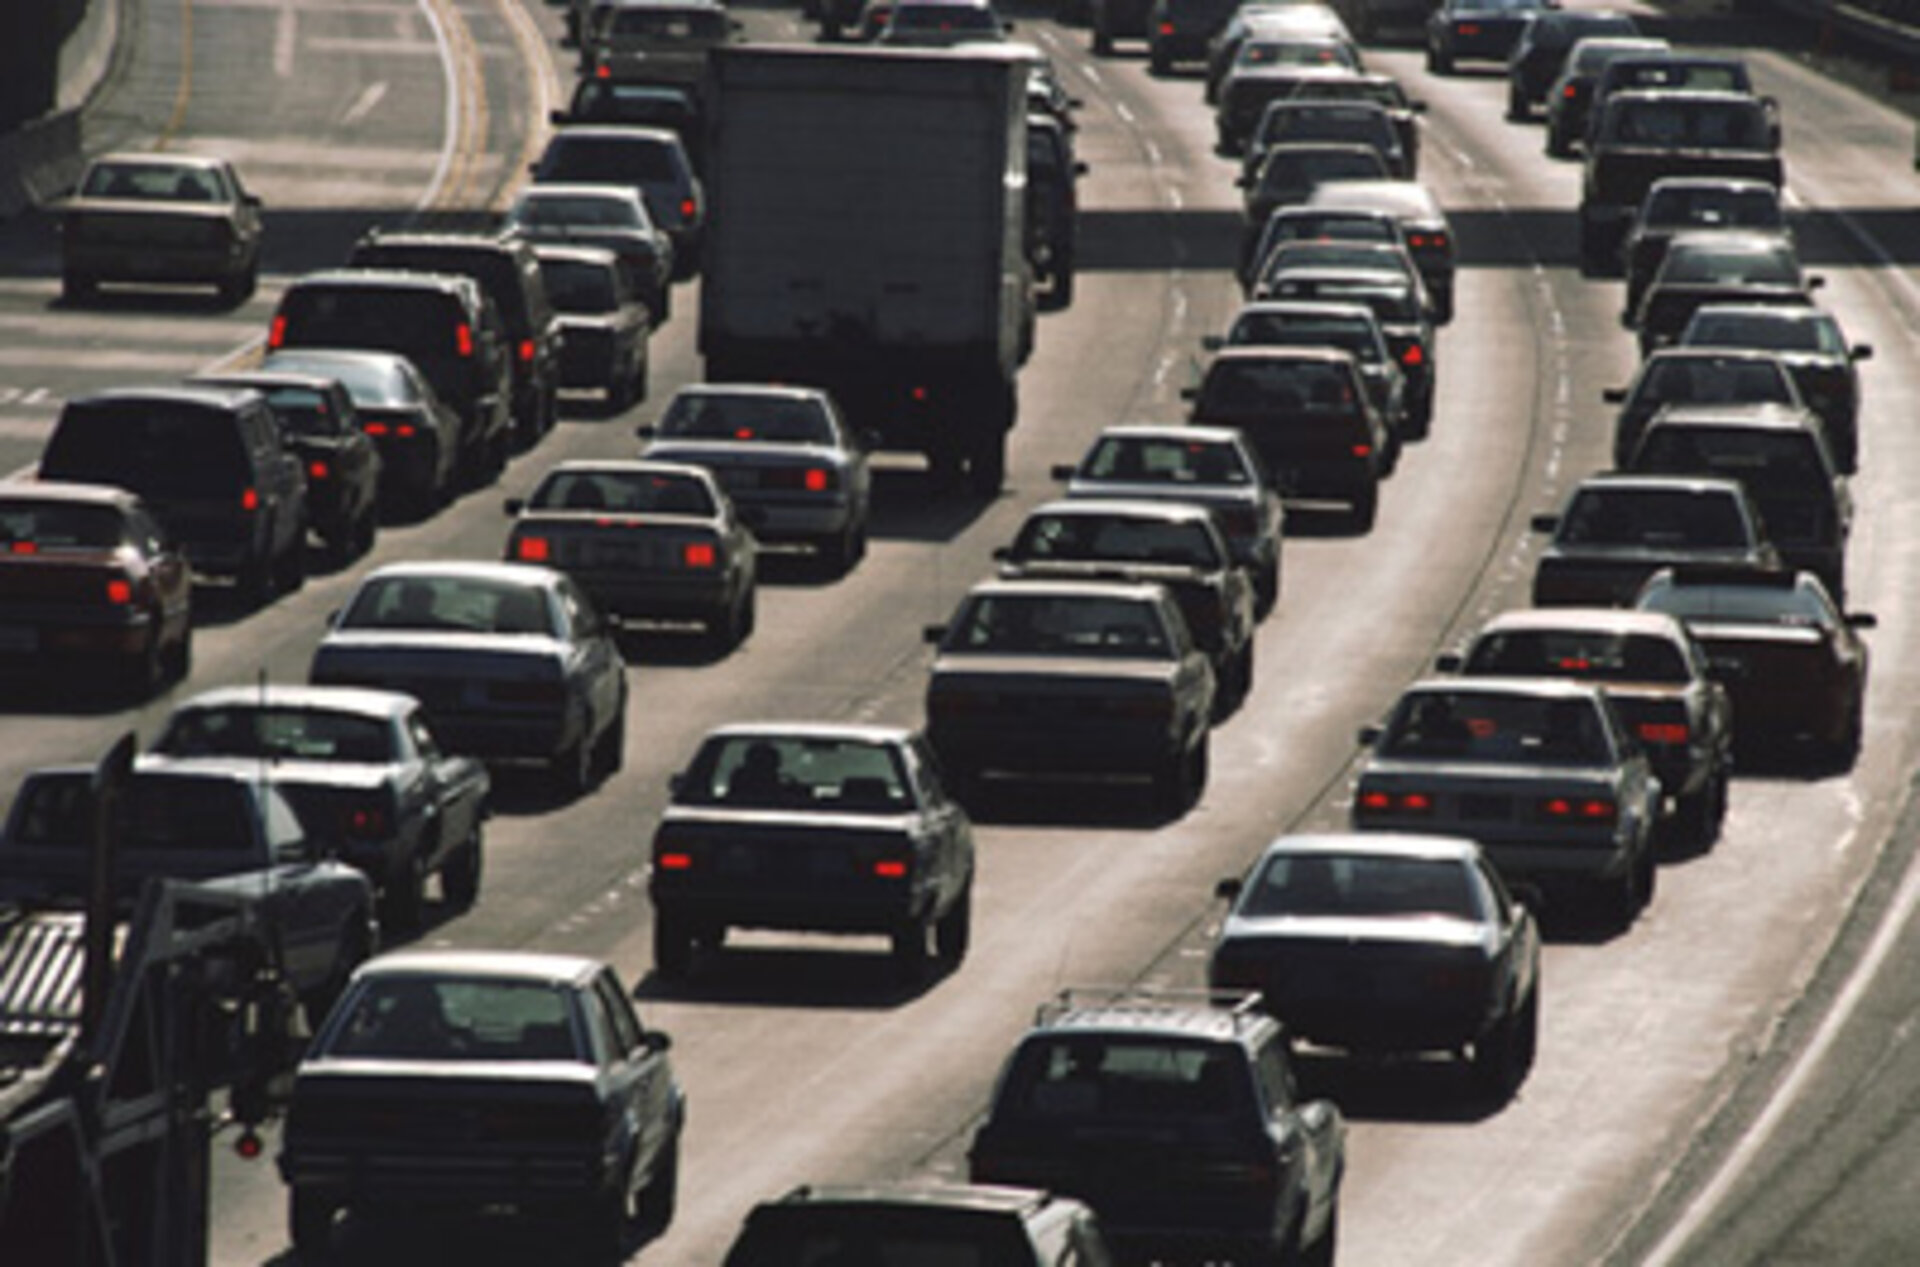 Traffic congestion is an increasing problem